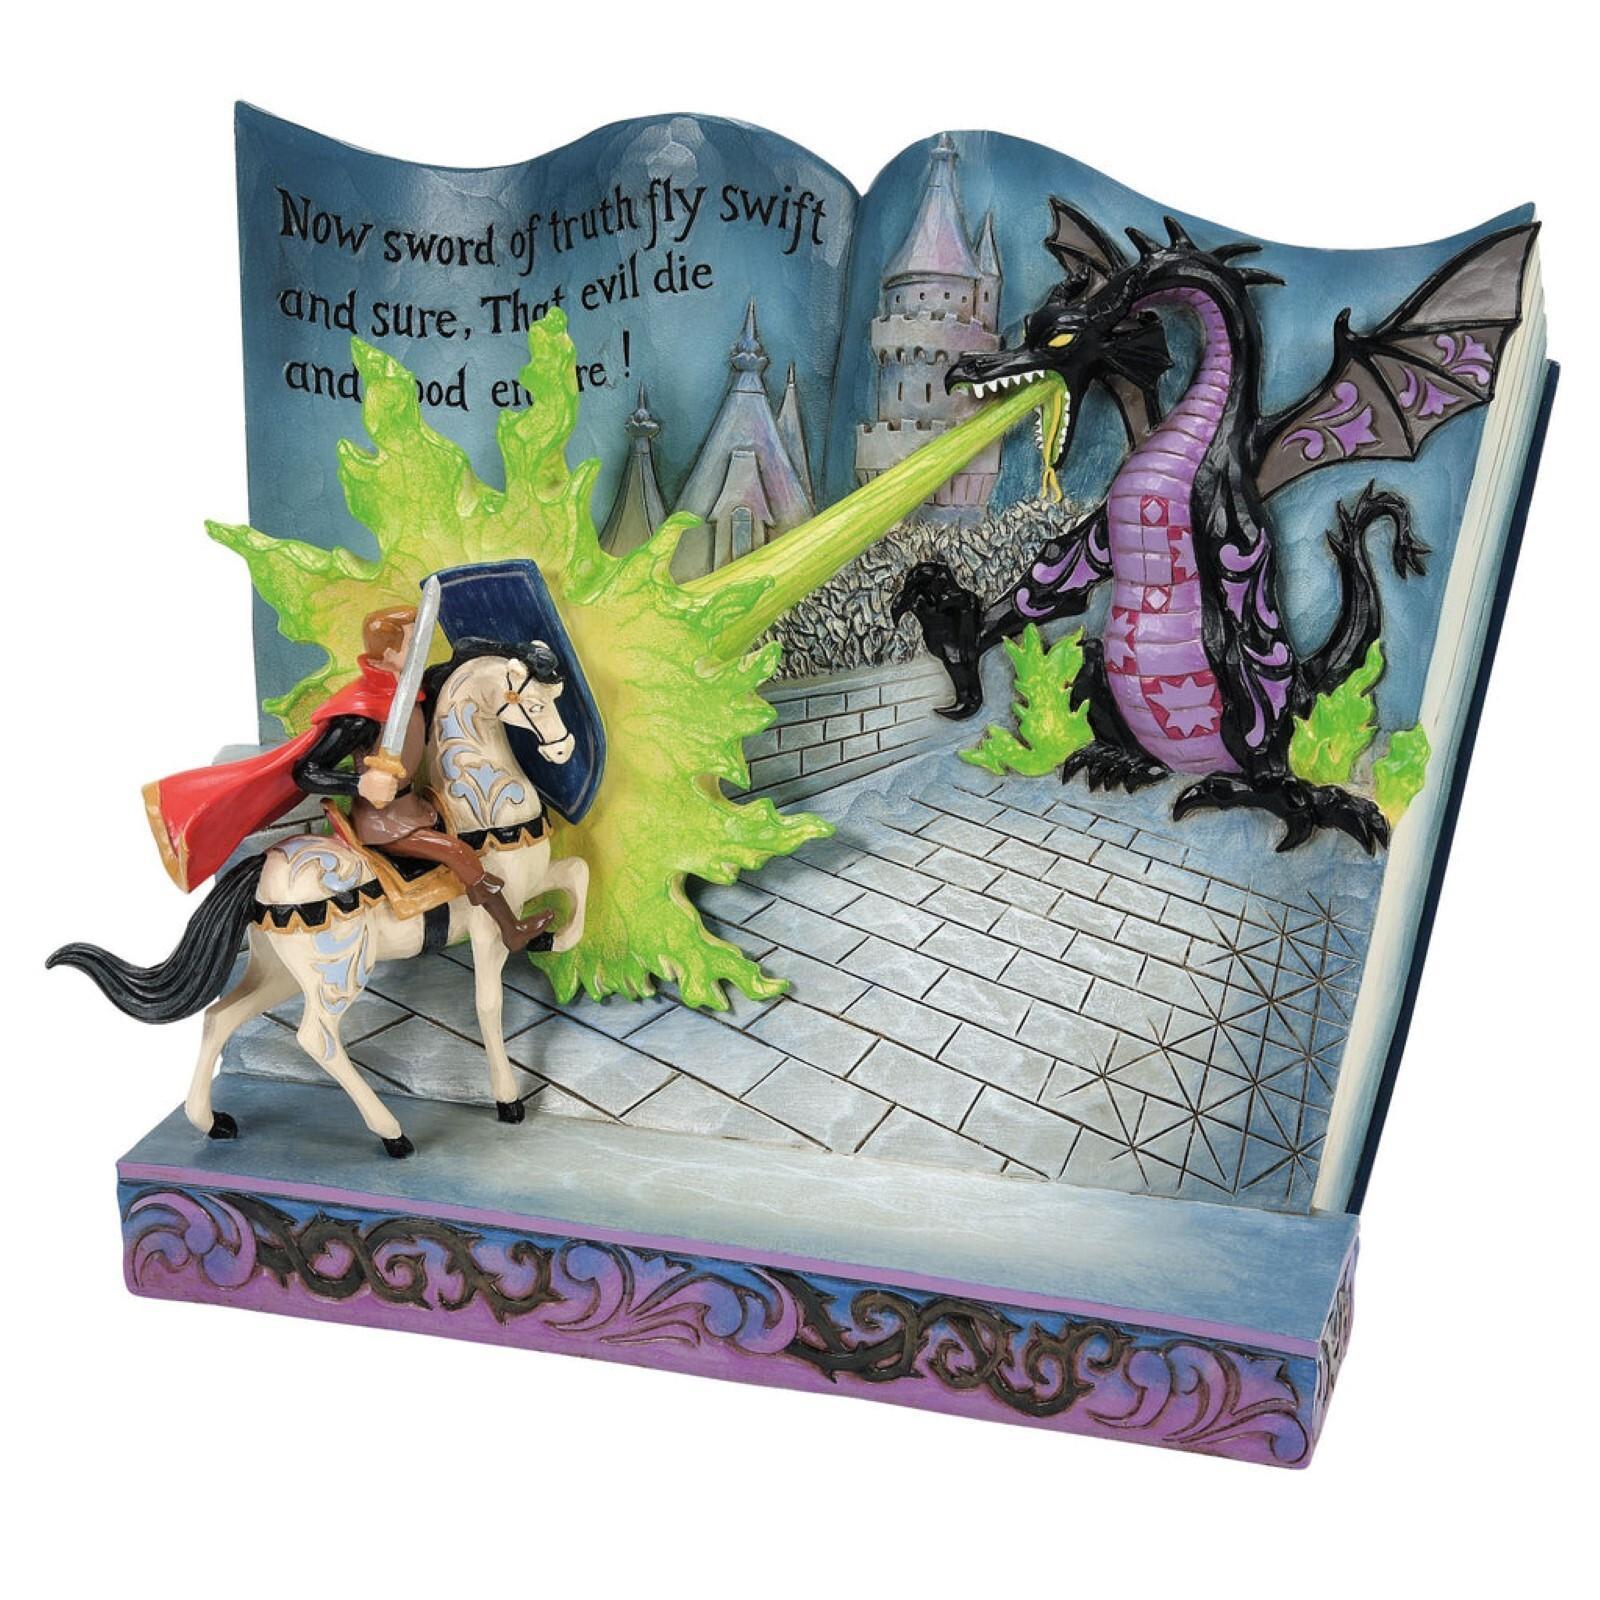 Disney Traditions Prince Philip and Dragon From Sleeping Beauty Storybook